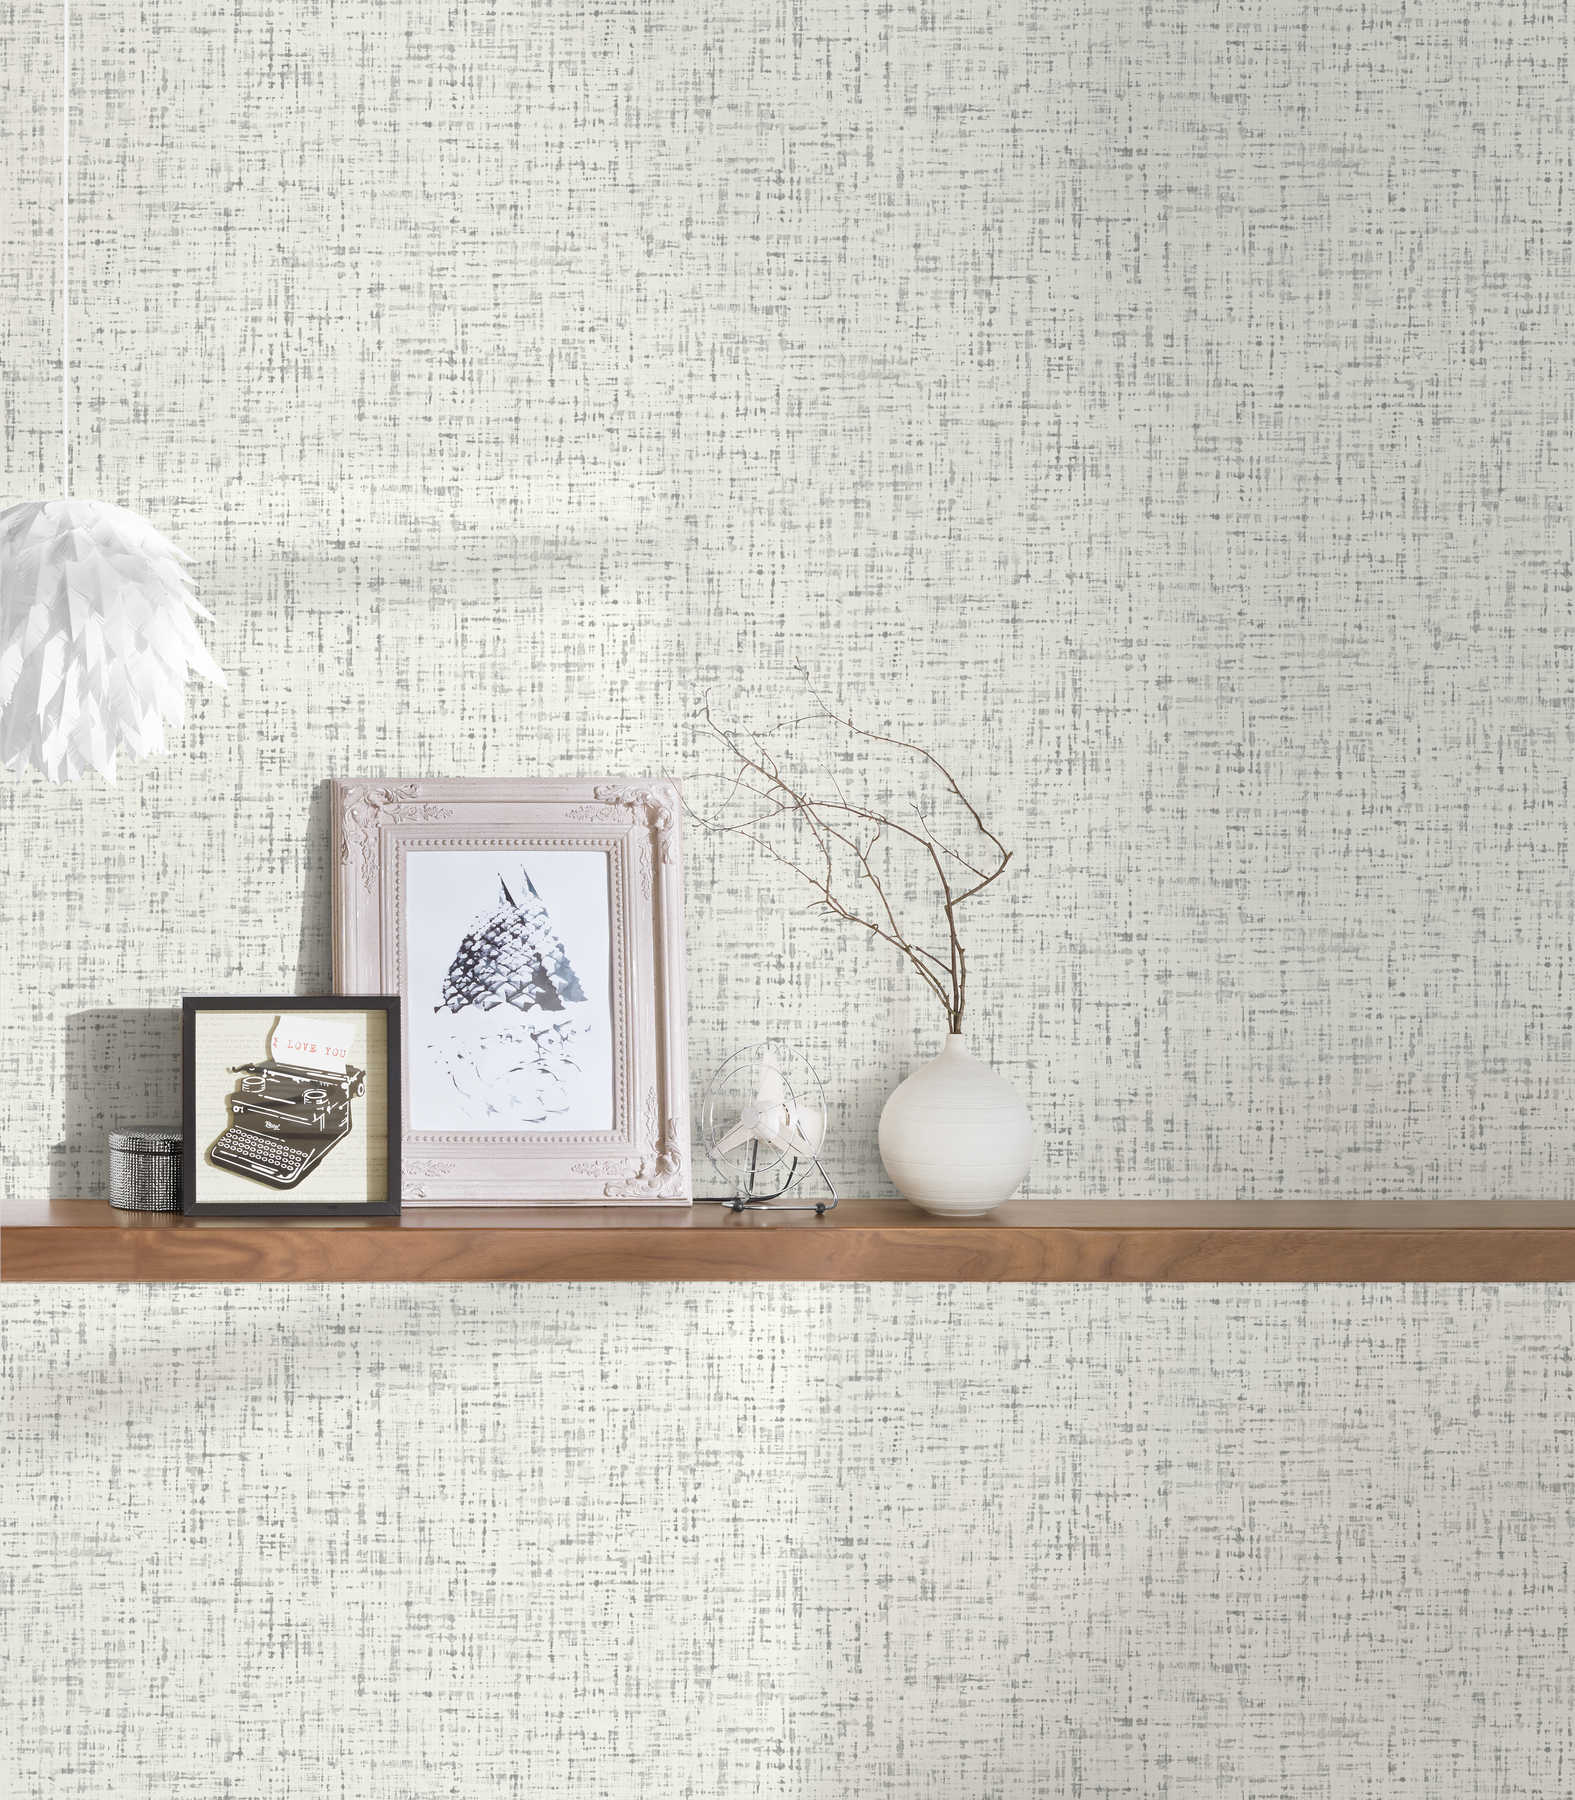             Non-woven wallpaper mottled textile look tweed design - white, grey
        